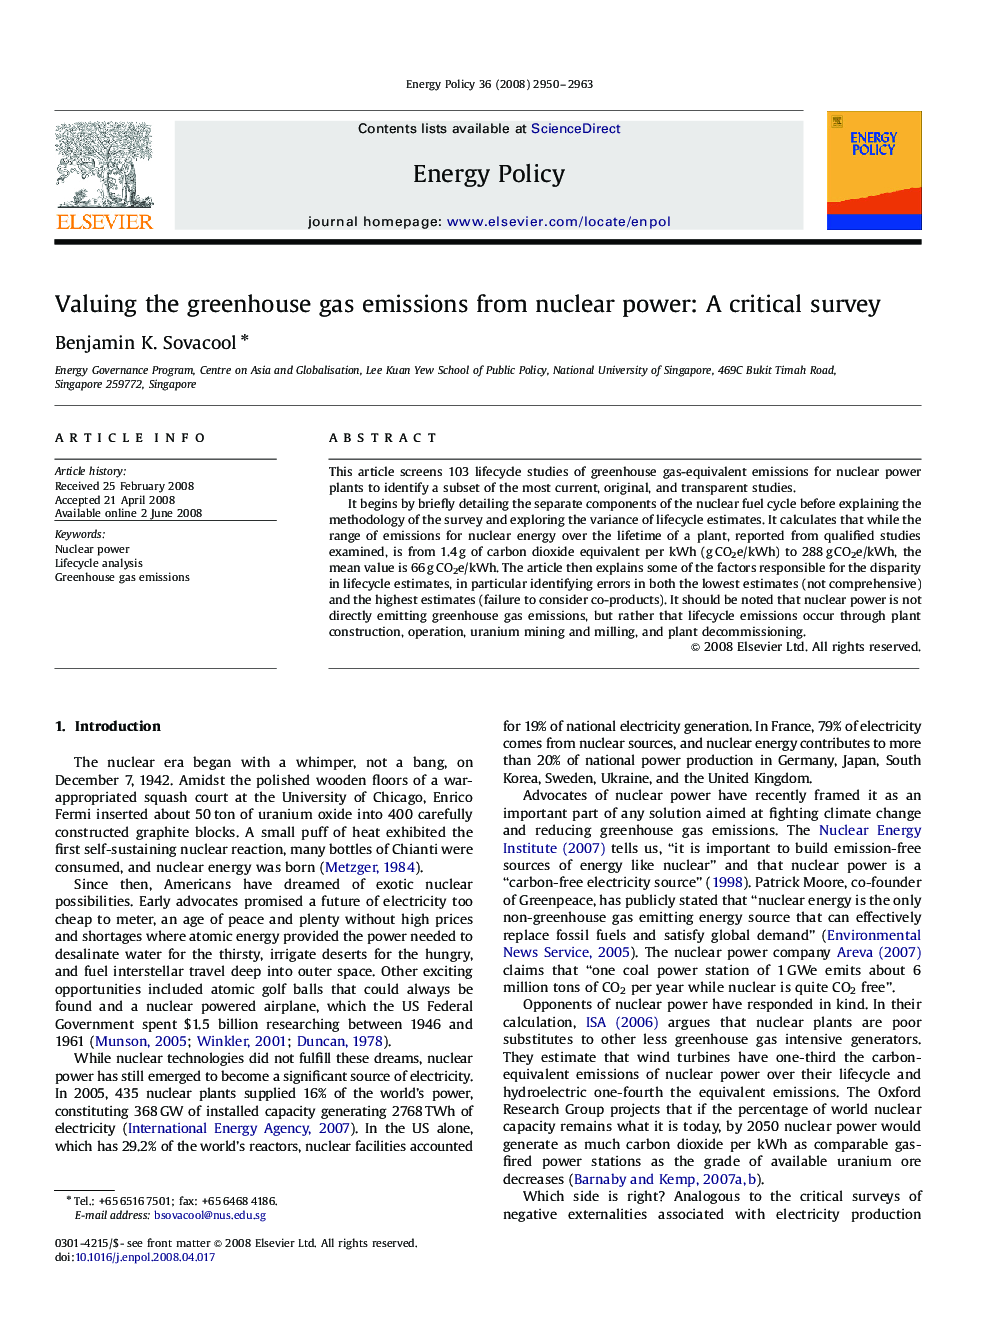 Valuing the greenhouse gas emissions from nuclear power: A critical survey